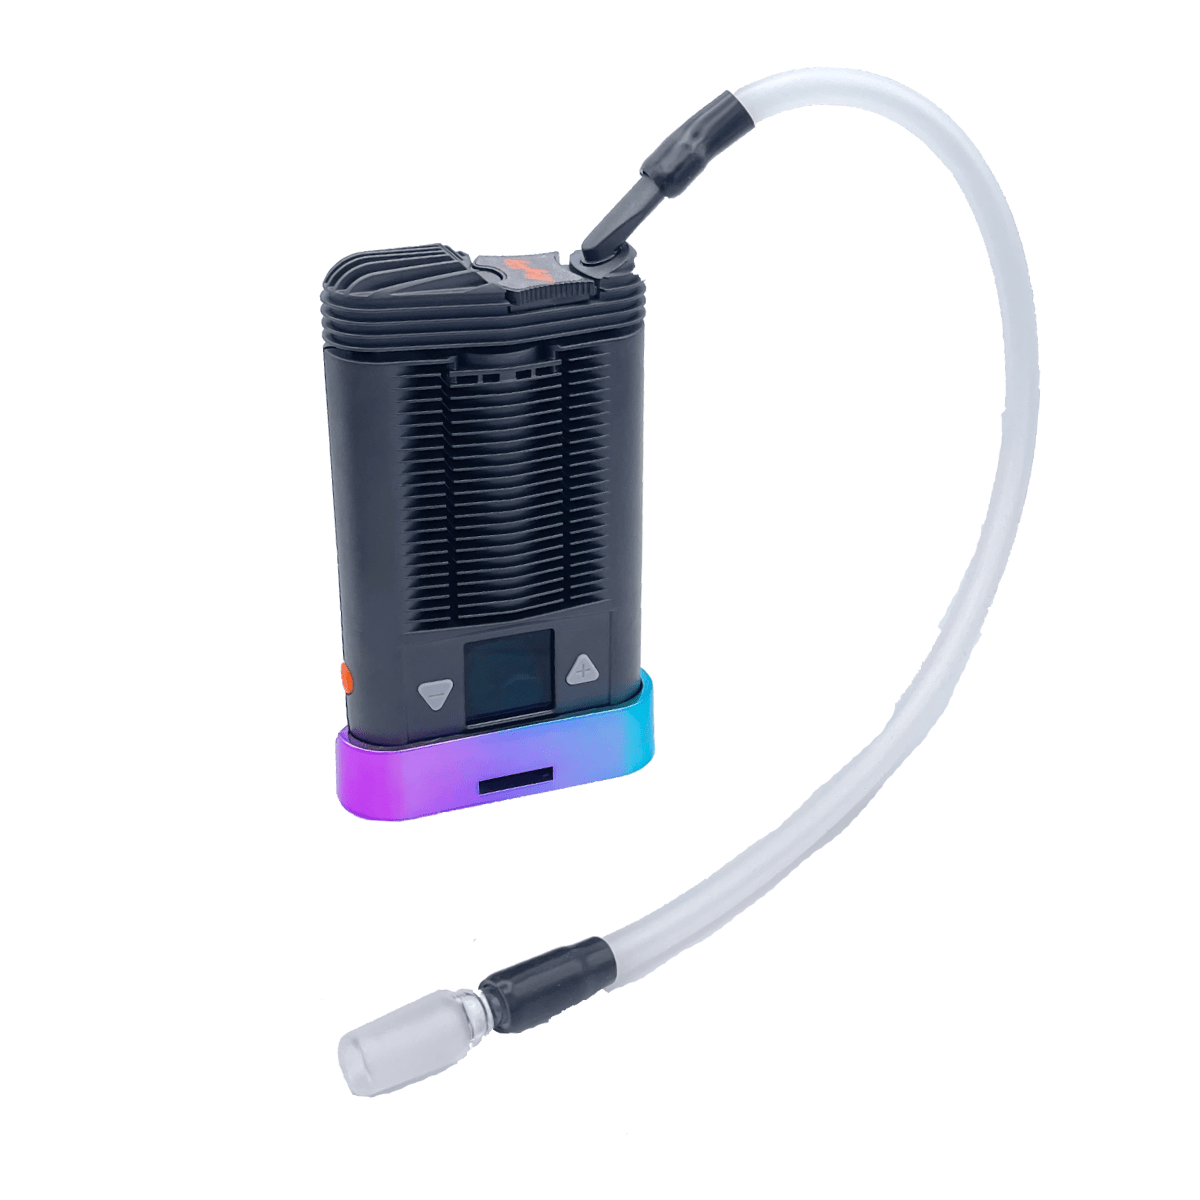 Crafty / Mighty Whip Adapter - Vapefiend UK